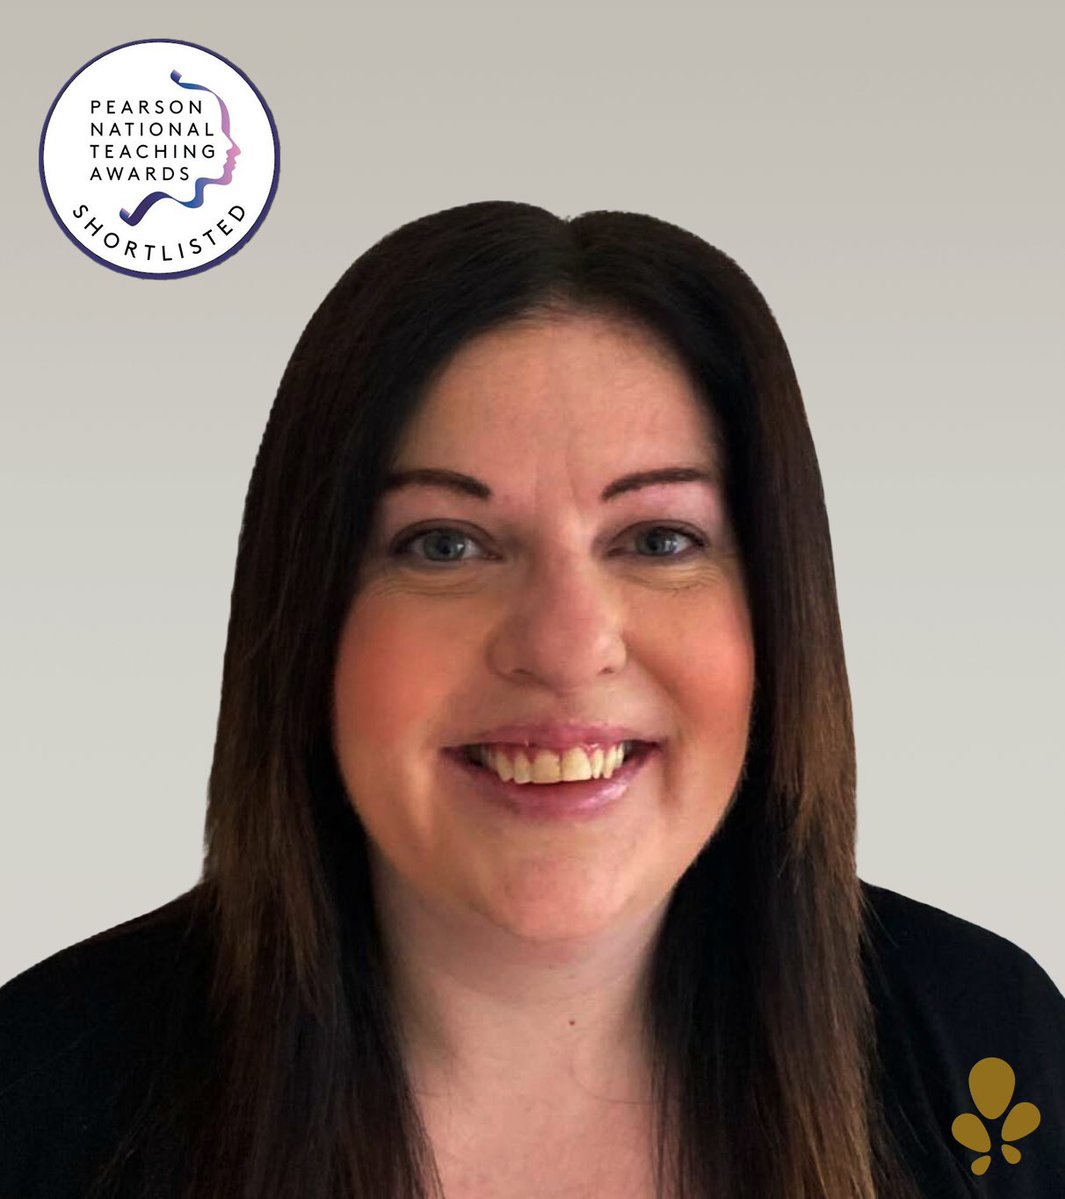 We are thrilled to announce our SEND Lead Stacey Evans has been nominated in the Excellence in Special Needs Education category at the Pearson National Teacher Awards. A massive congratulations to Stacey and best of luck #achievingexcellencetogether #TeachingHeroes